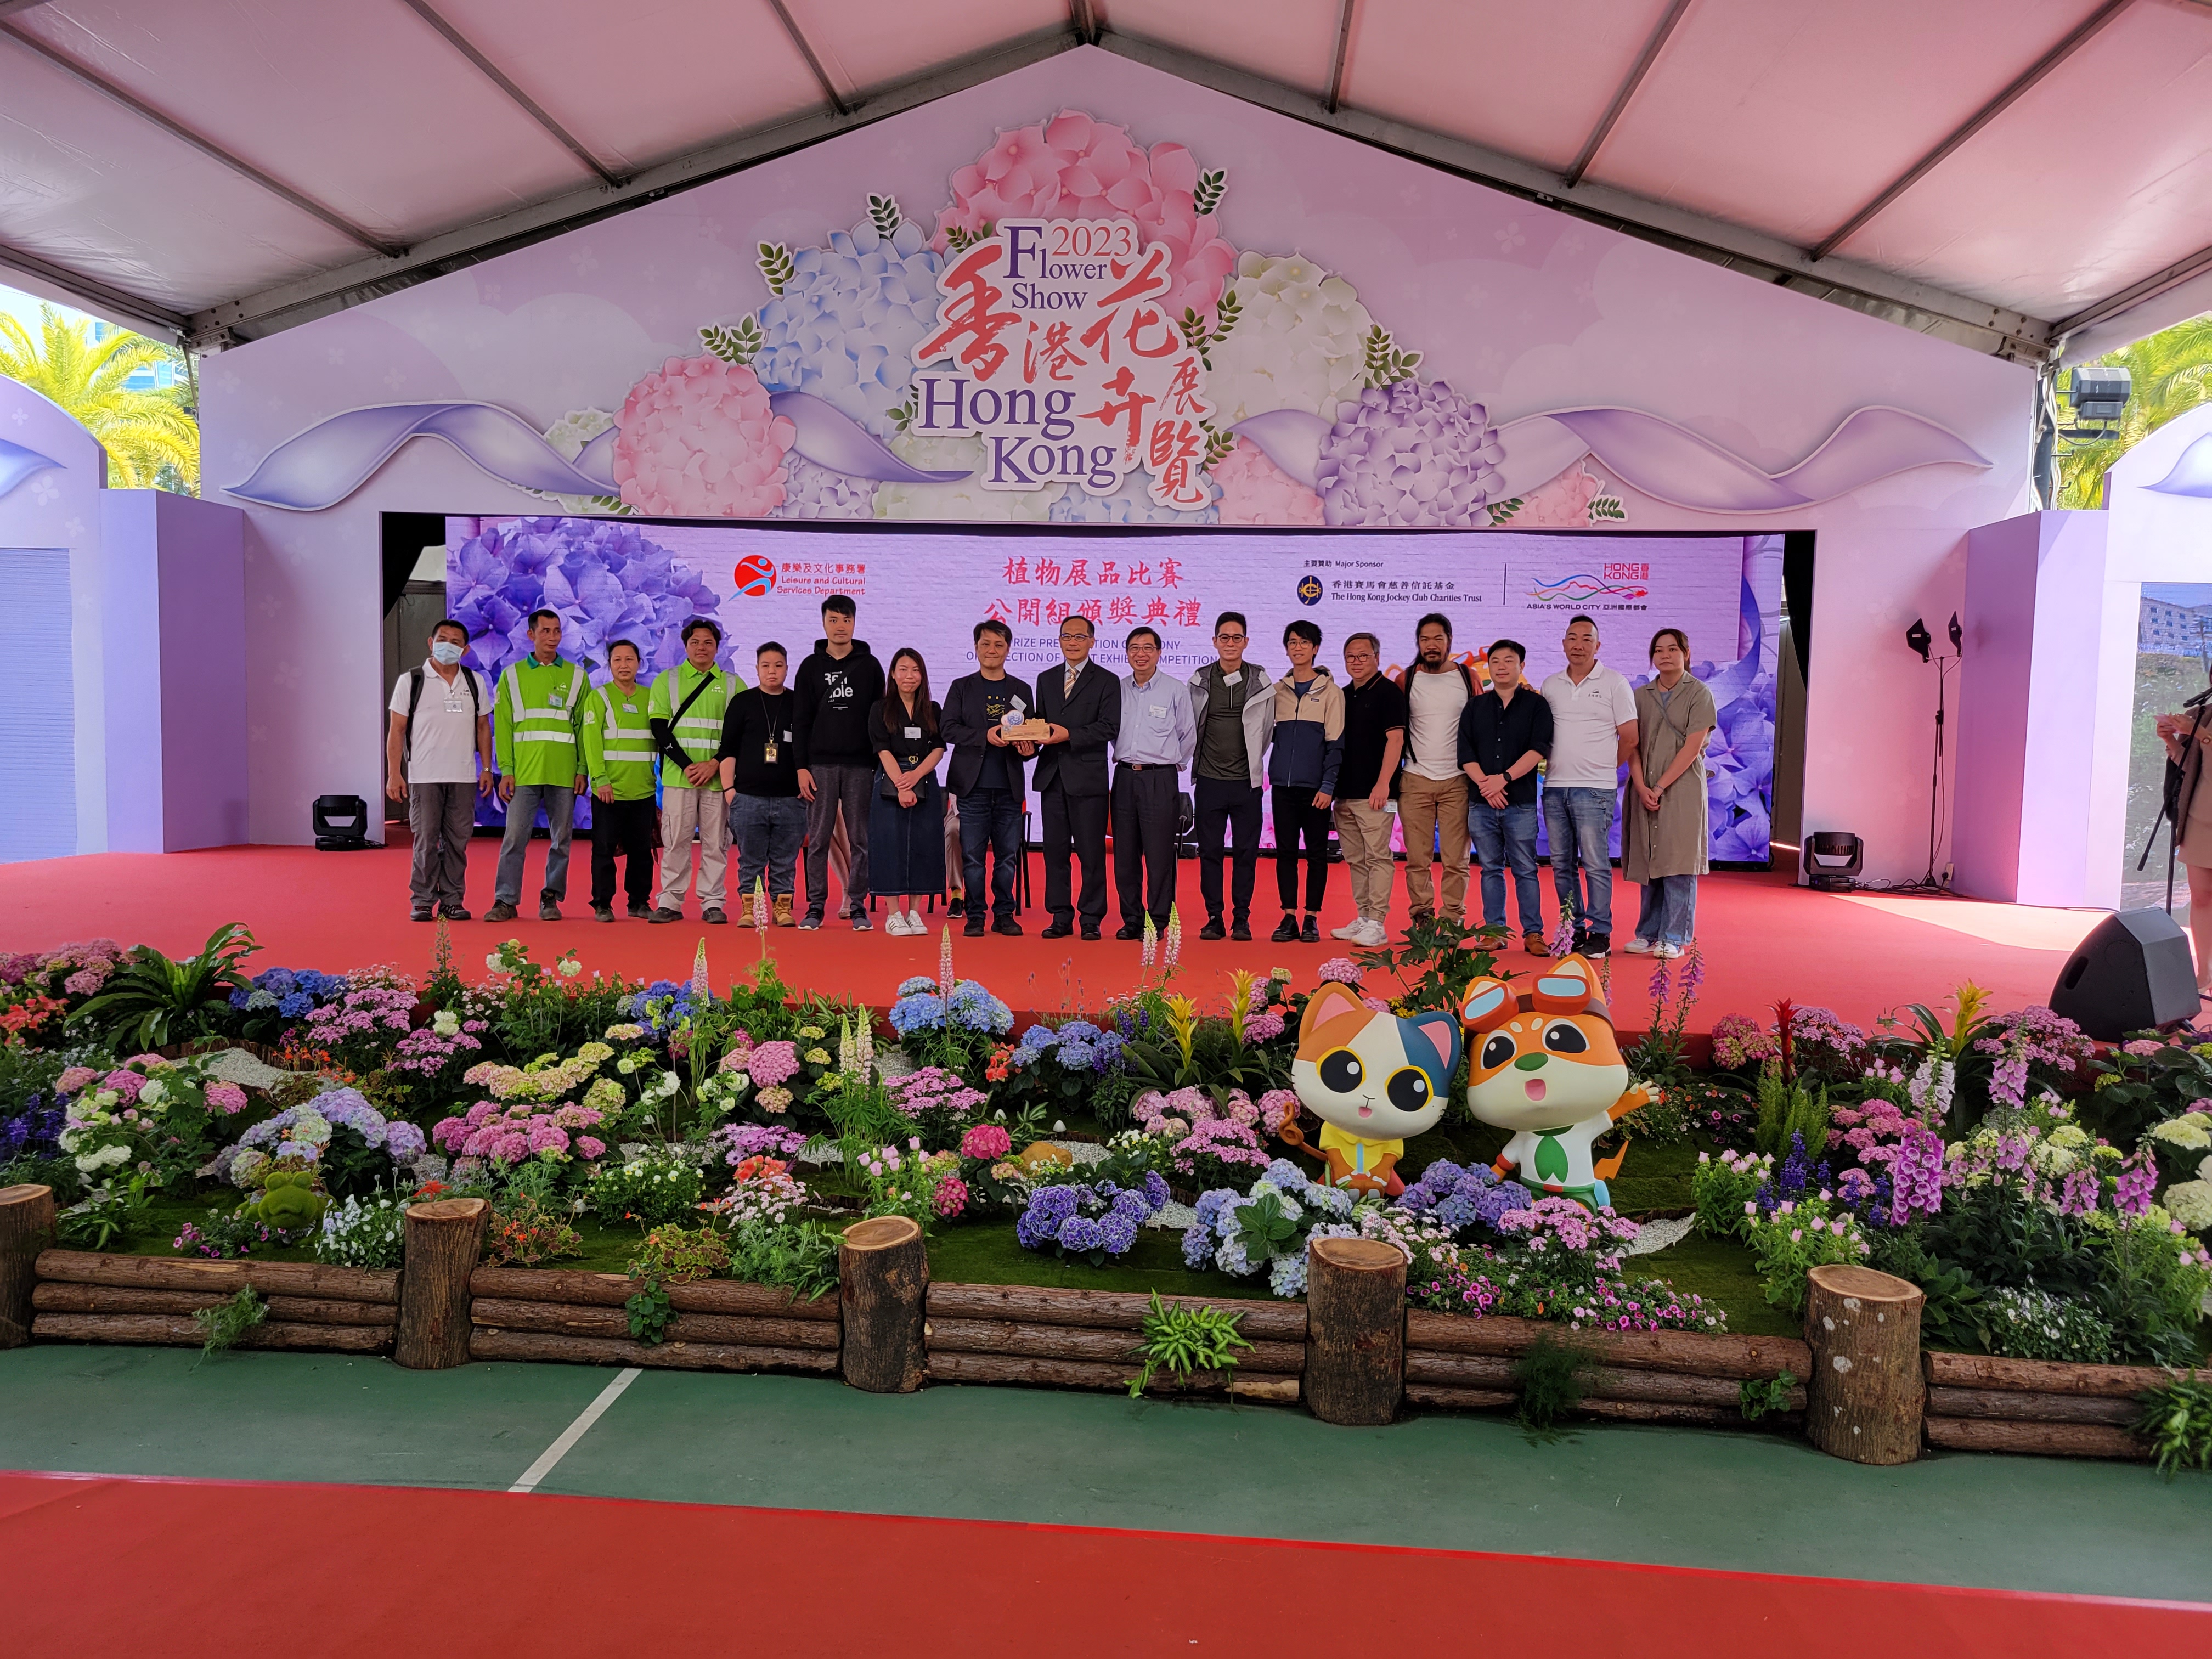 Hong Kong Flower Show 2023 Display Section (Local) -
Grand Award for Design Excellence (Landscape Display)